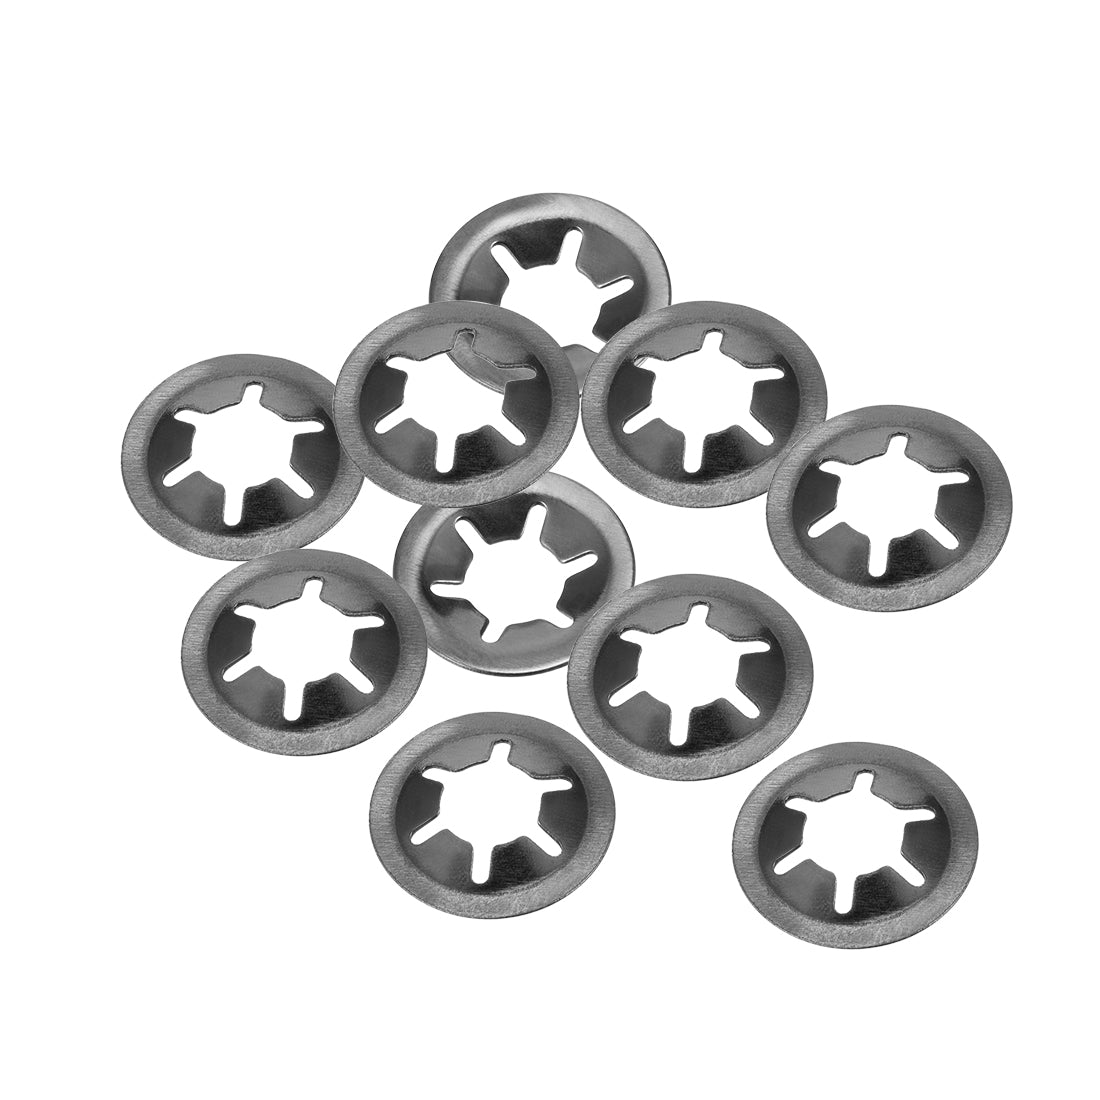 Uxcell Uxcell M12 Internal Tooth Star Locking Washer 11.2mm I.D. 25mm O.D. Lock Washers Push On Locking Speed Clip, 65Mn Black Oxide Finish 10pcs